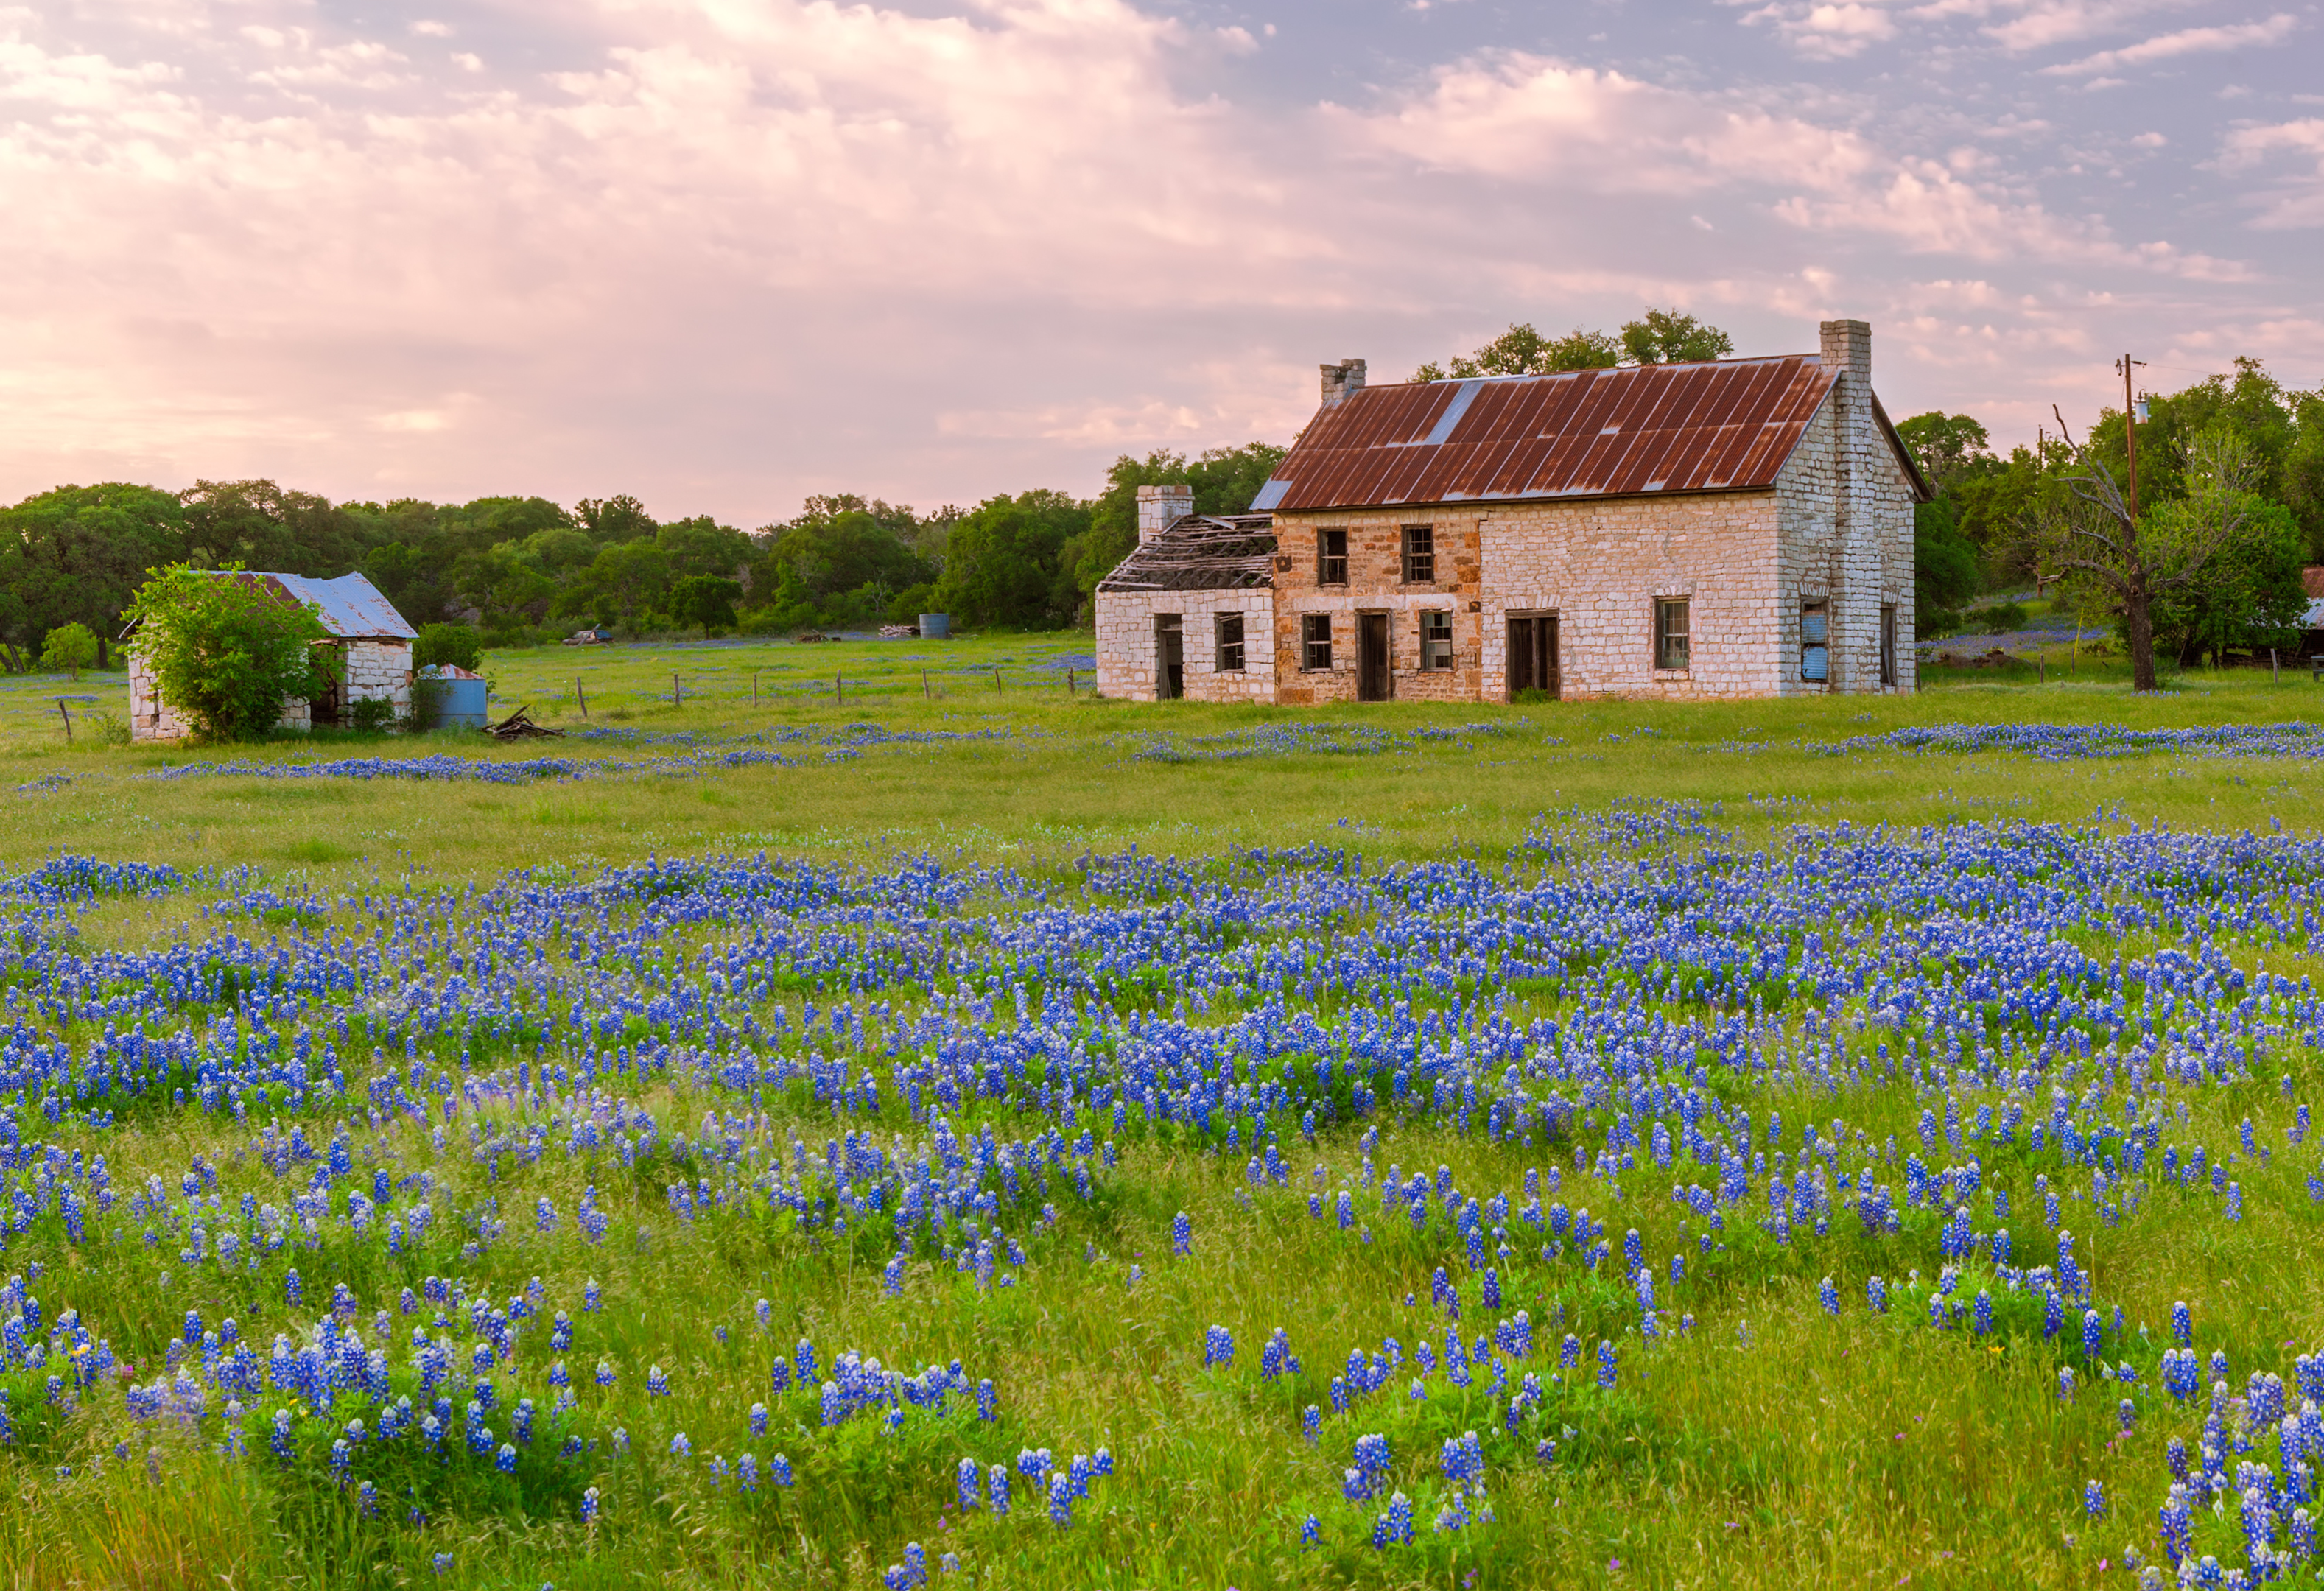 An old rustic house sits nestled in a field of bluebonnets in Marble Falls, Texas